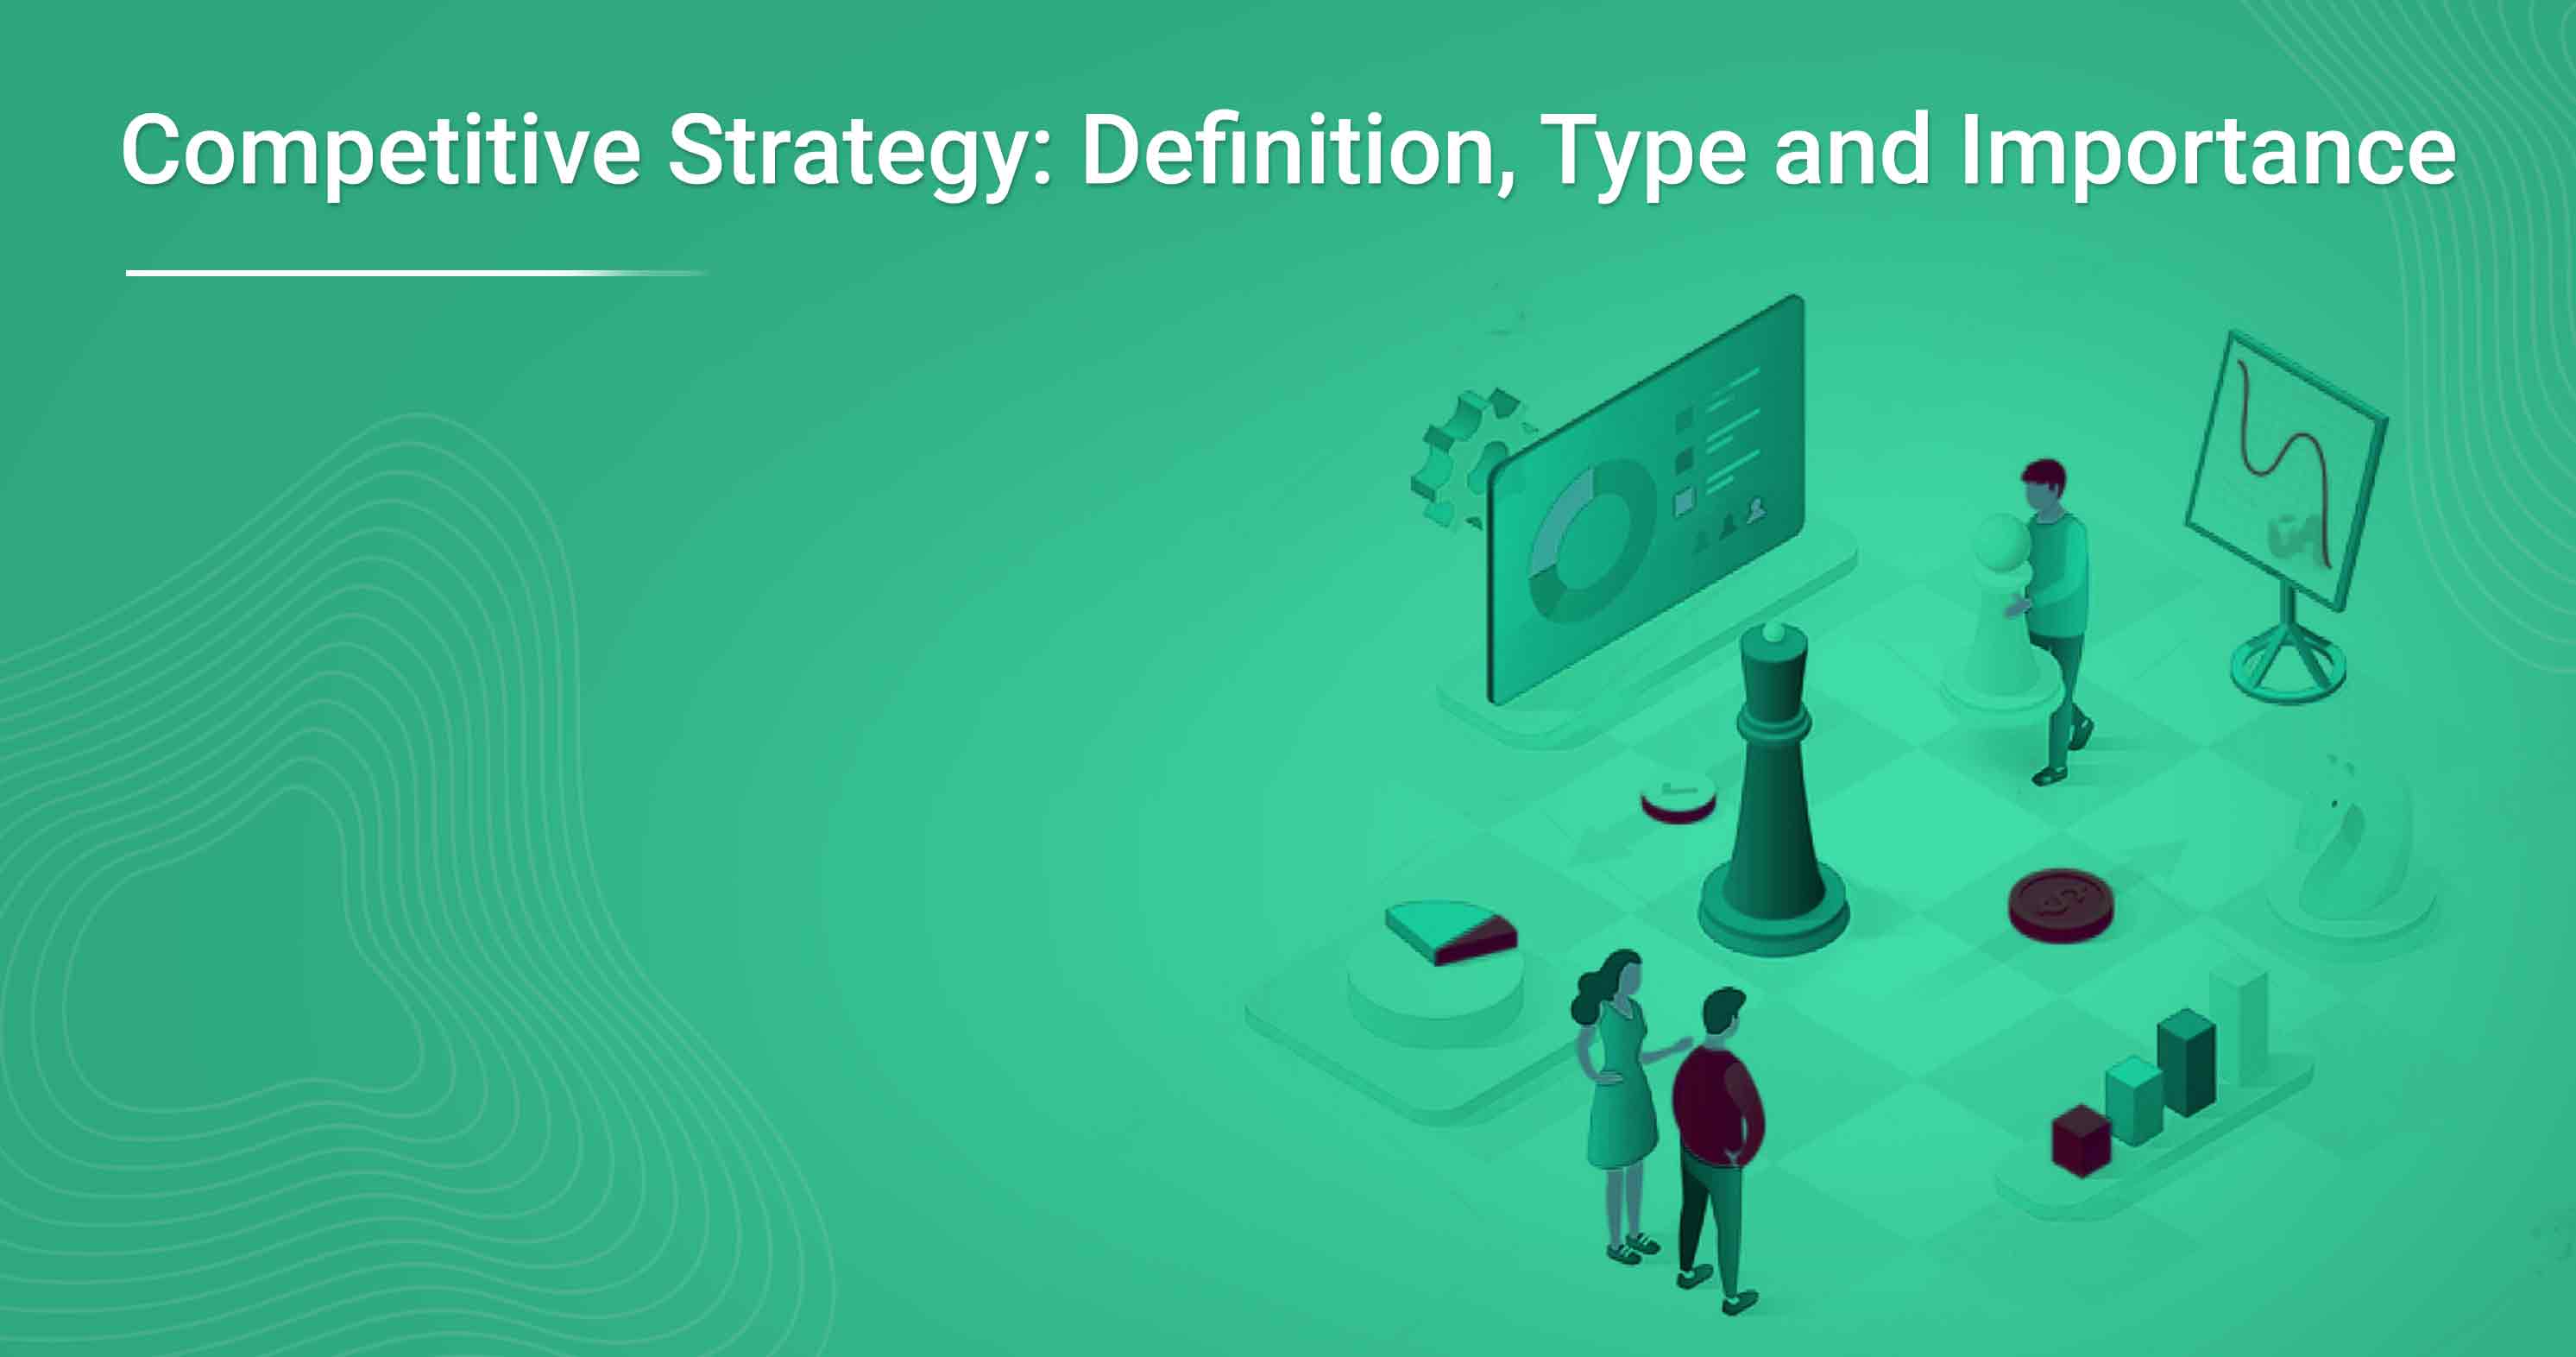 Competitive Strategy: Definition, Type and Importance